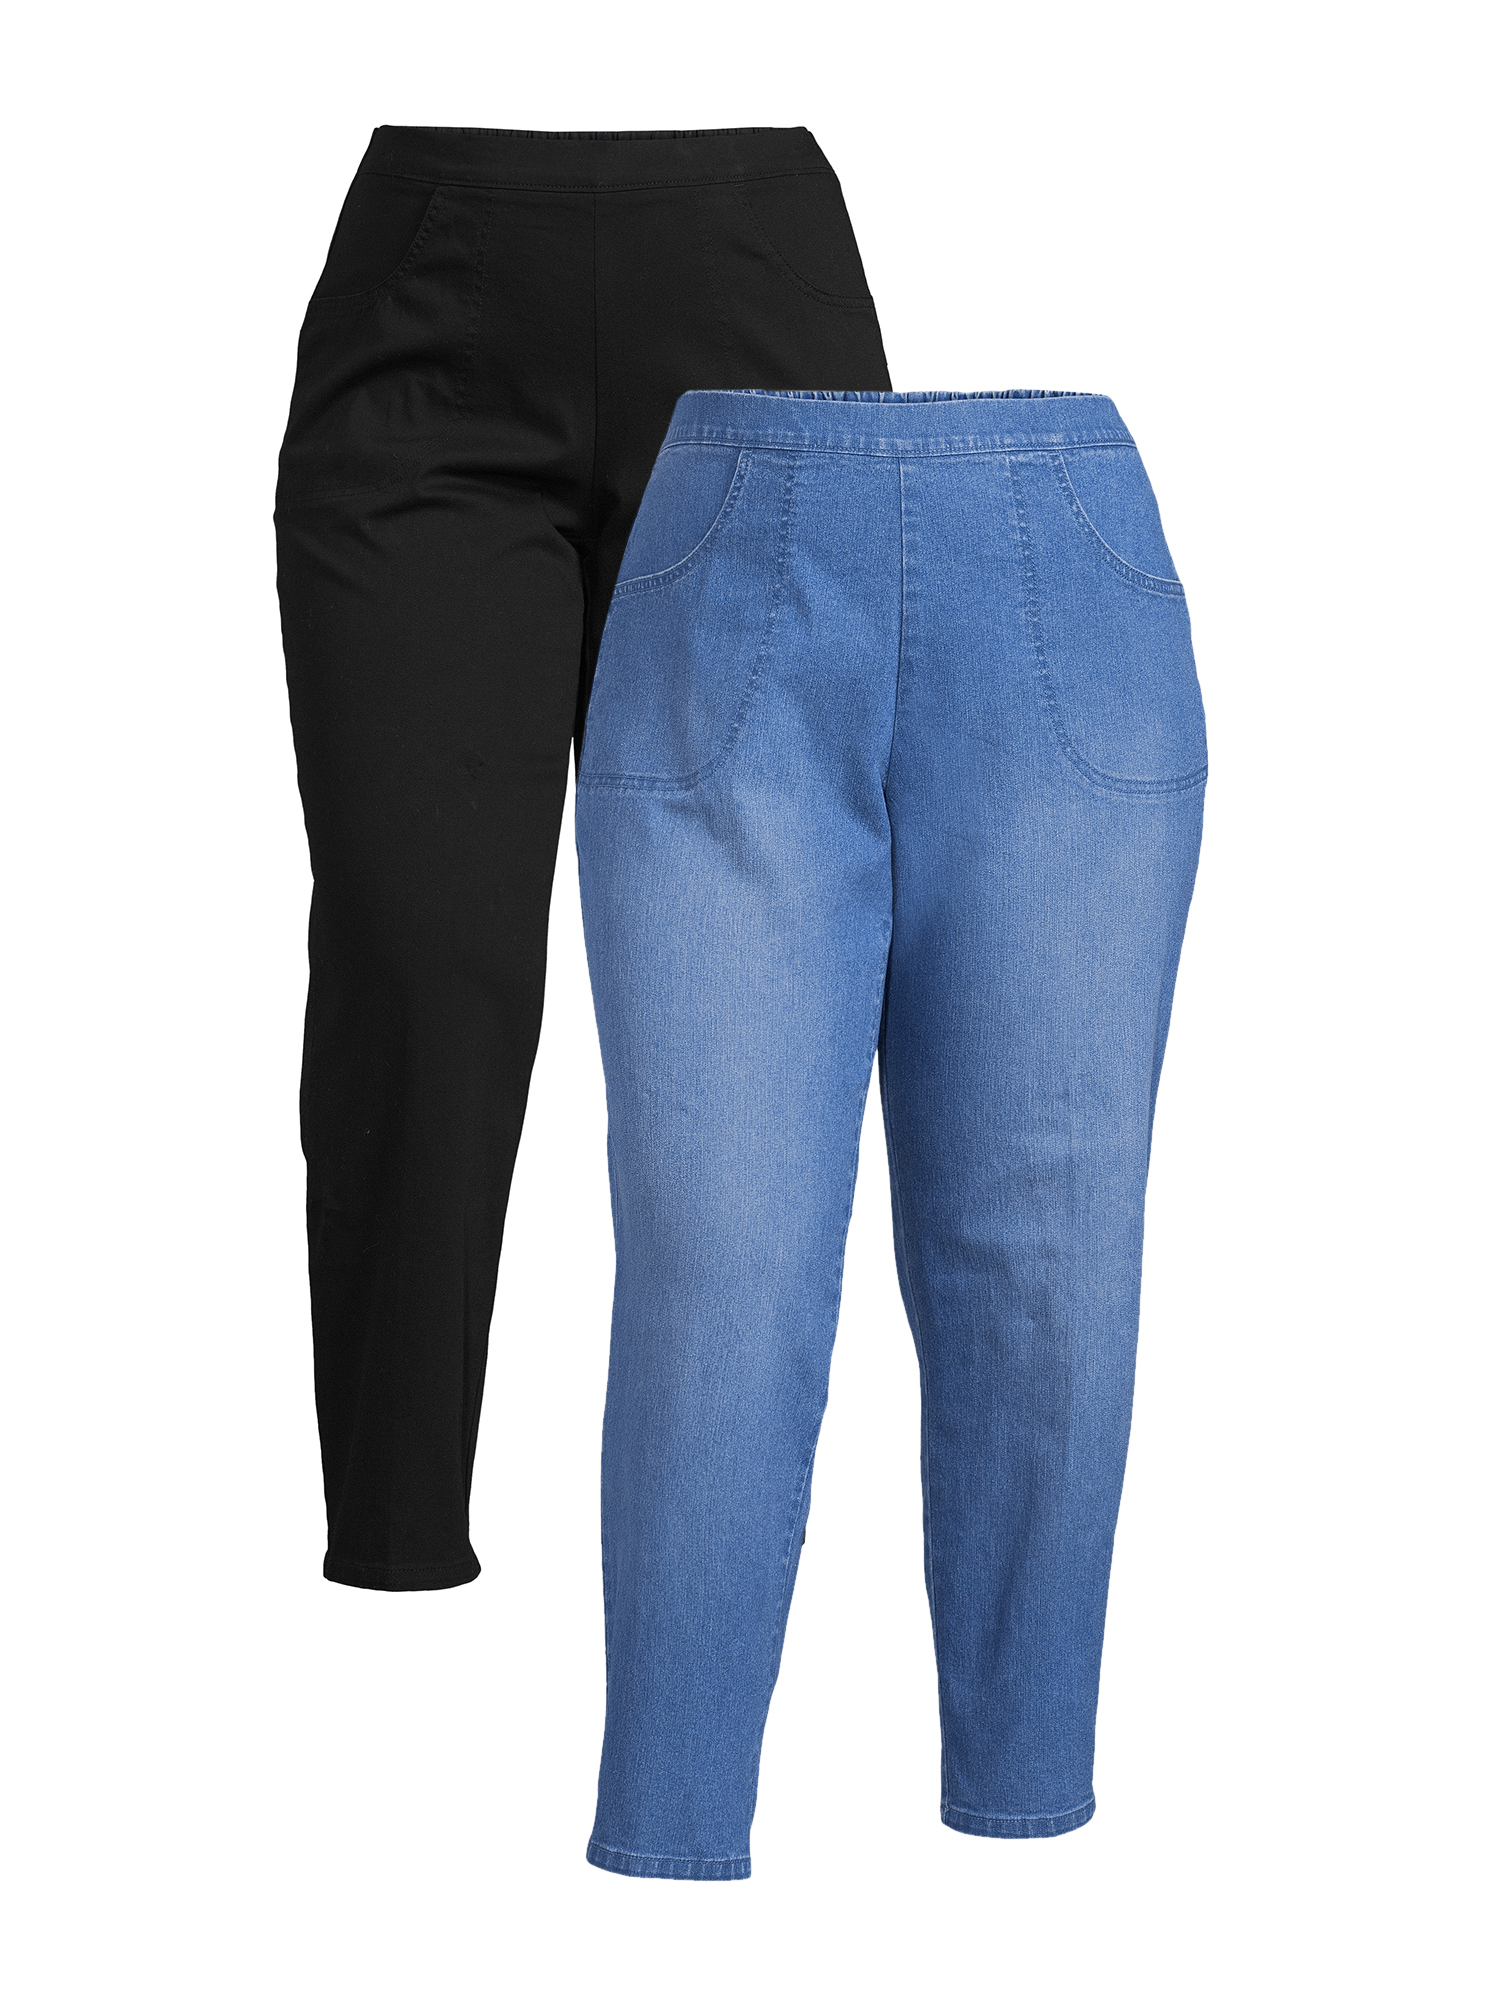 Just My Size Women's Plus Size 2 Pocket Pull On Pant, 2-Pack - image 1 of 3